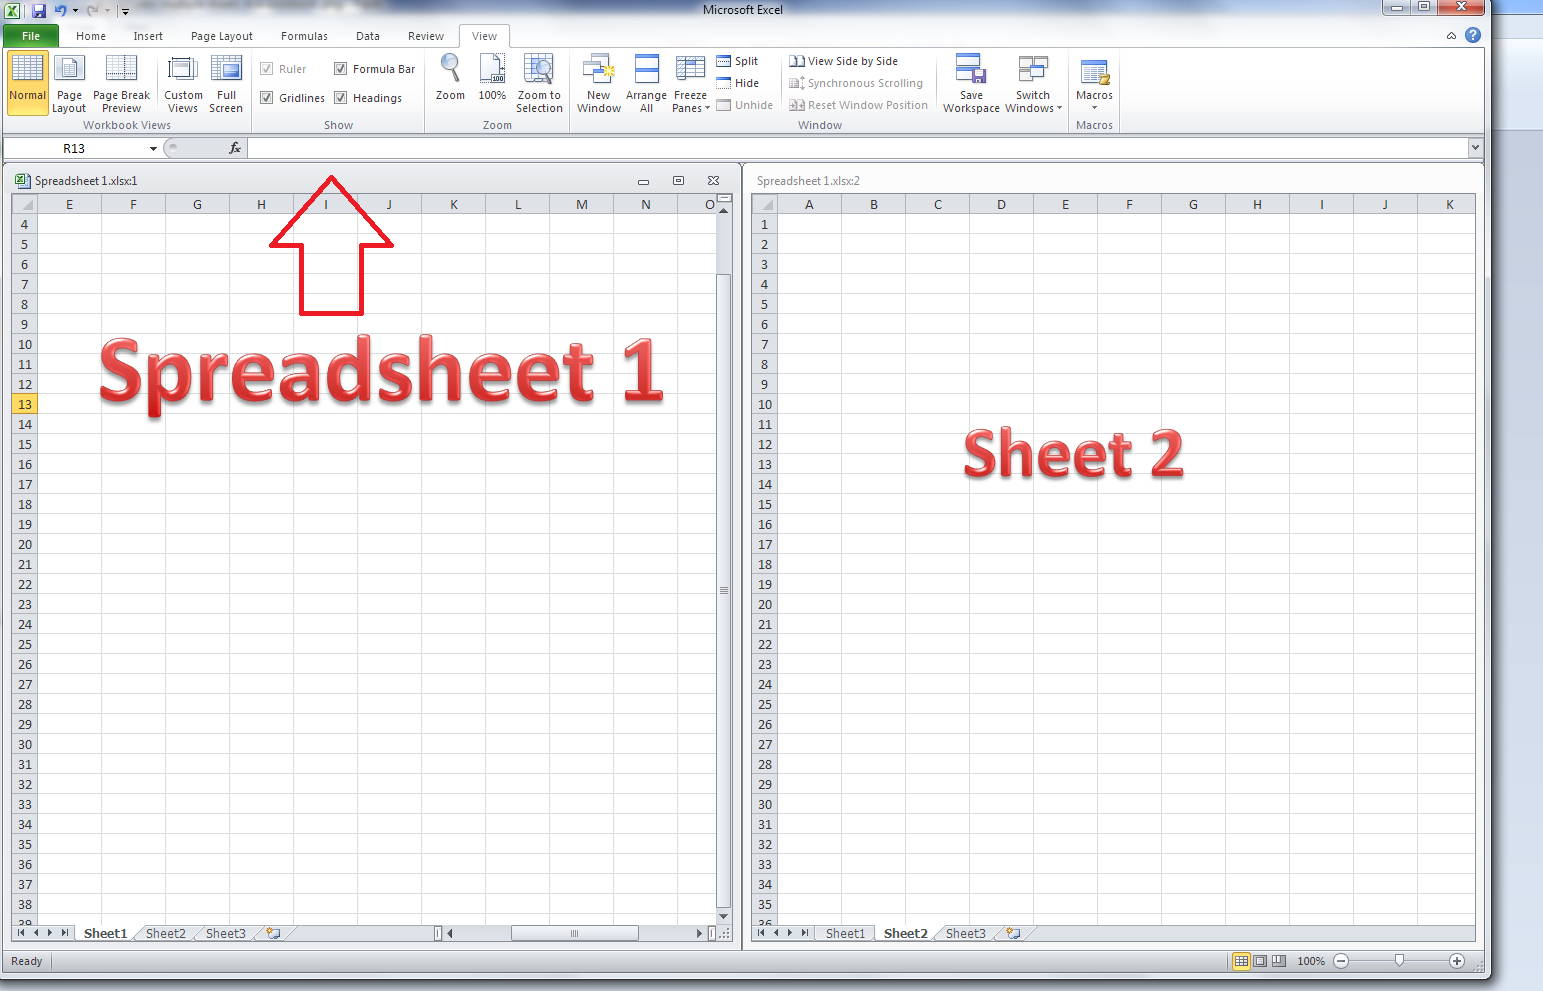 Spreadsheet Workbook pertaining to How Do I View Two Sheets Of An Excel Workbook At The Same Time